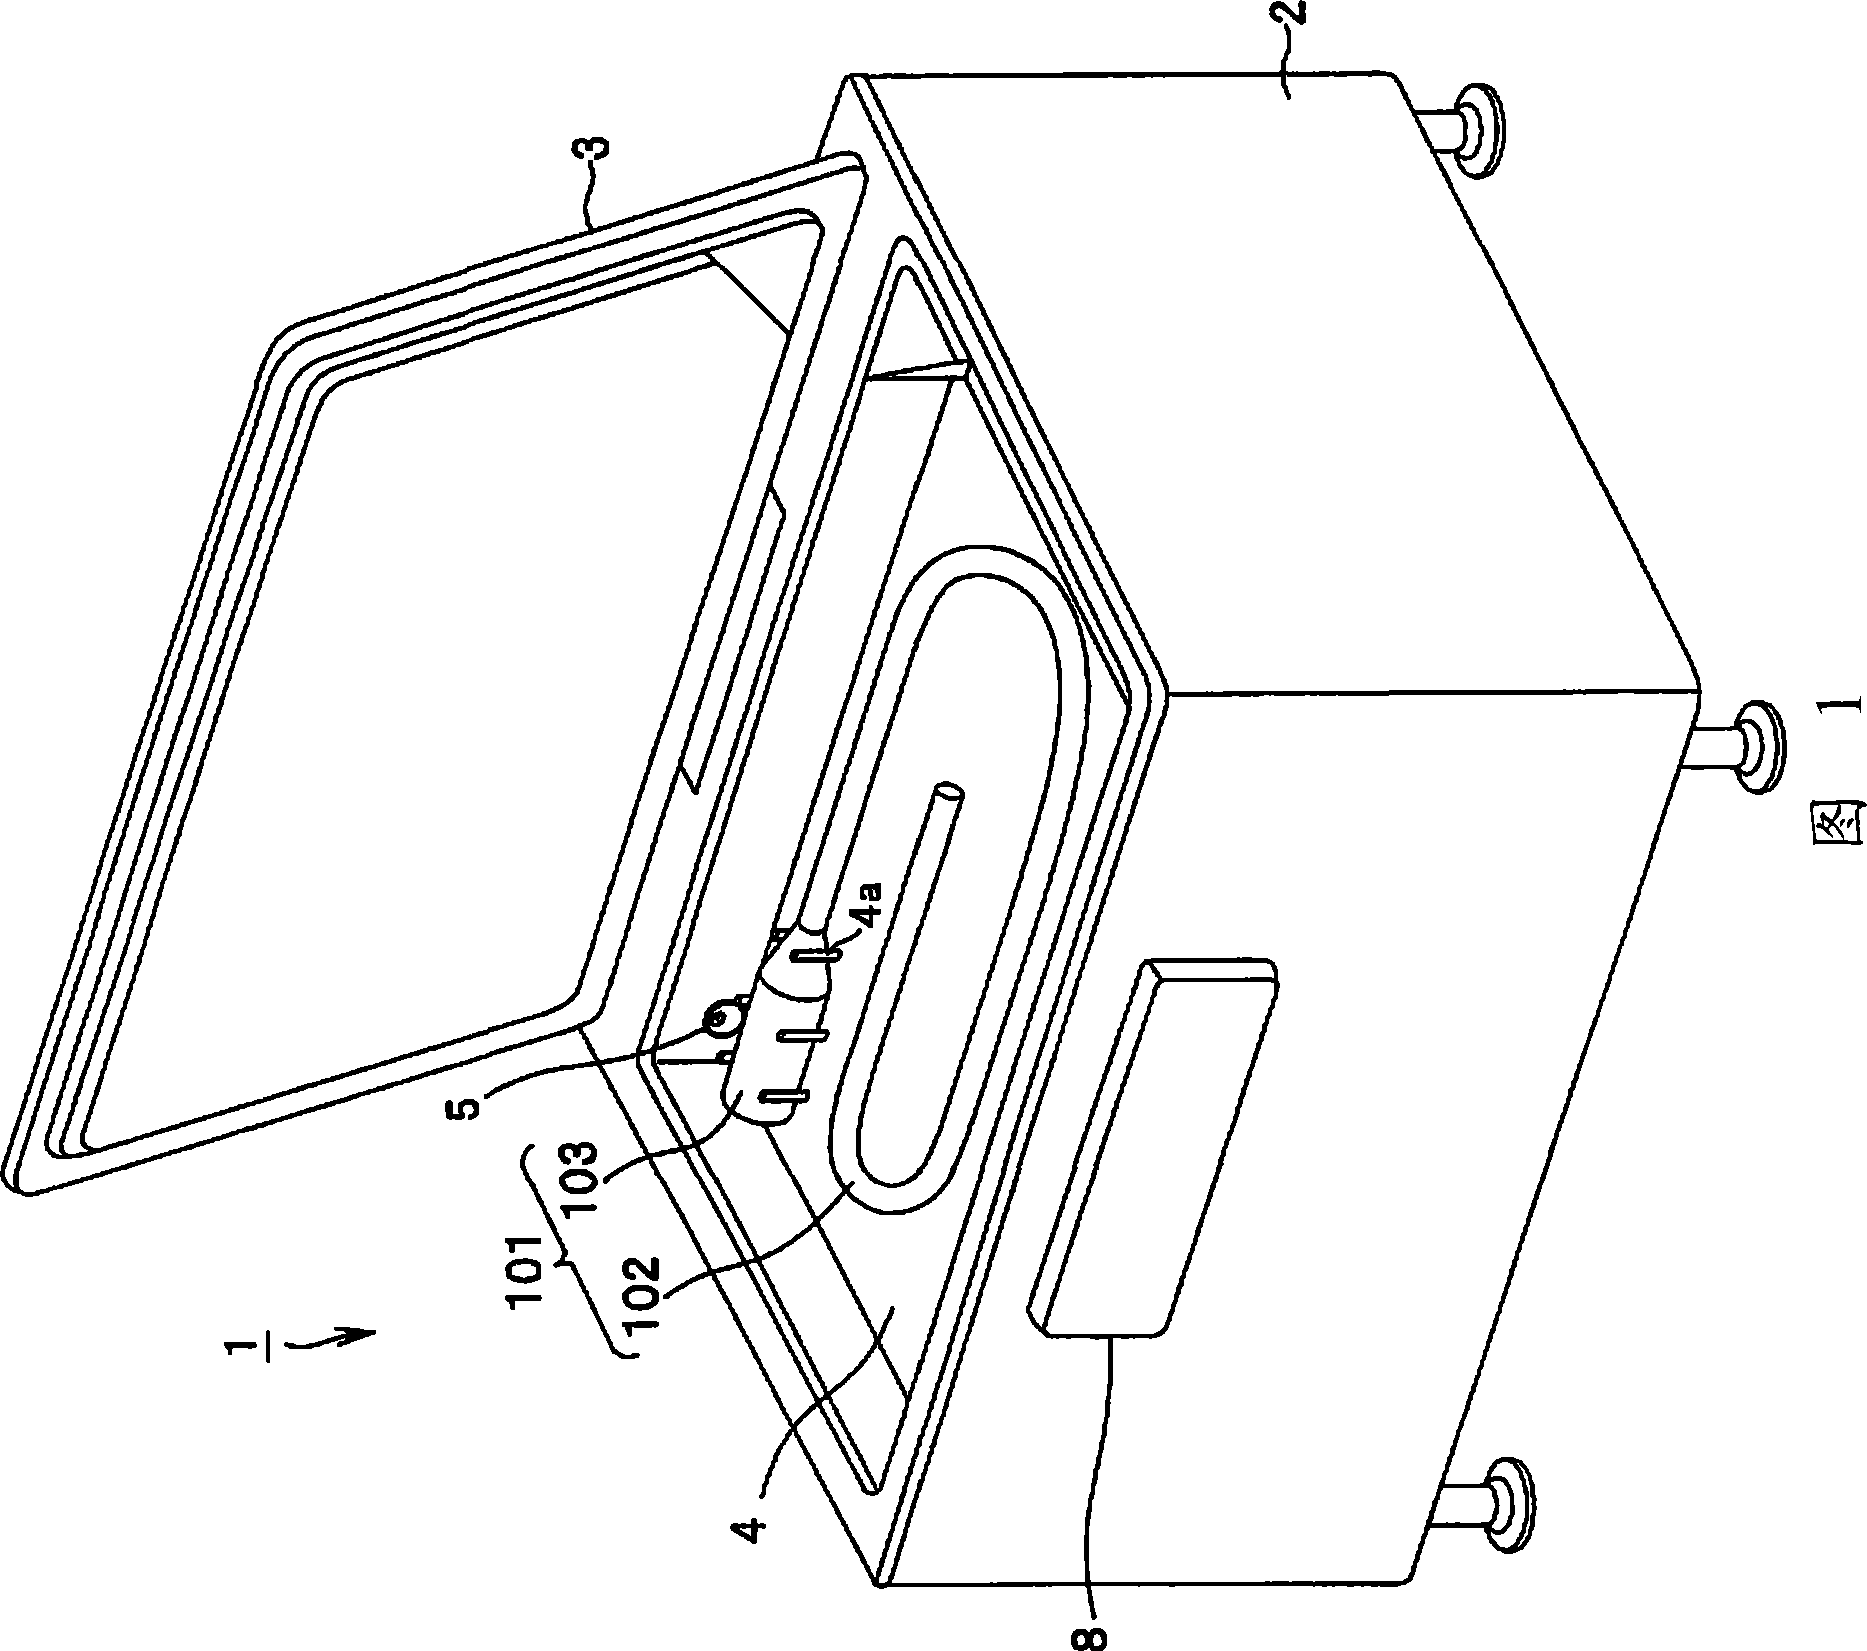 Endoscope washing and disinfecting apparatus